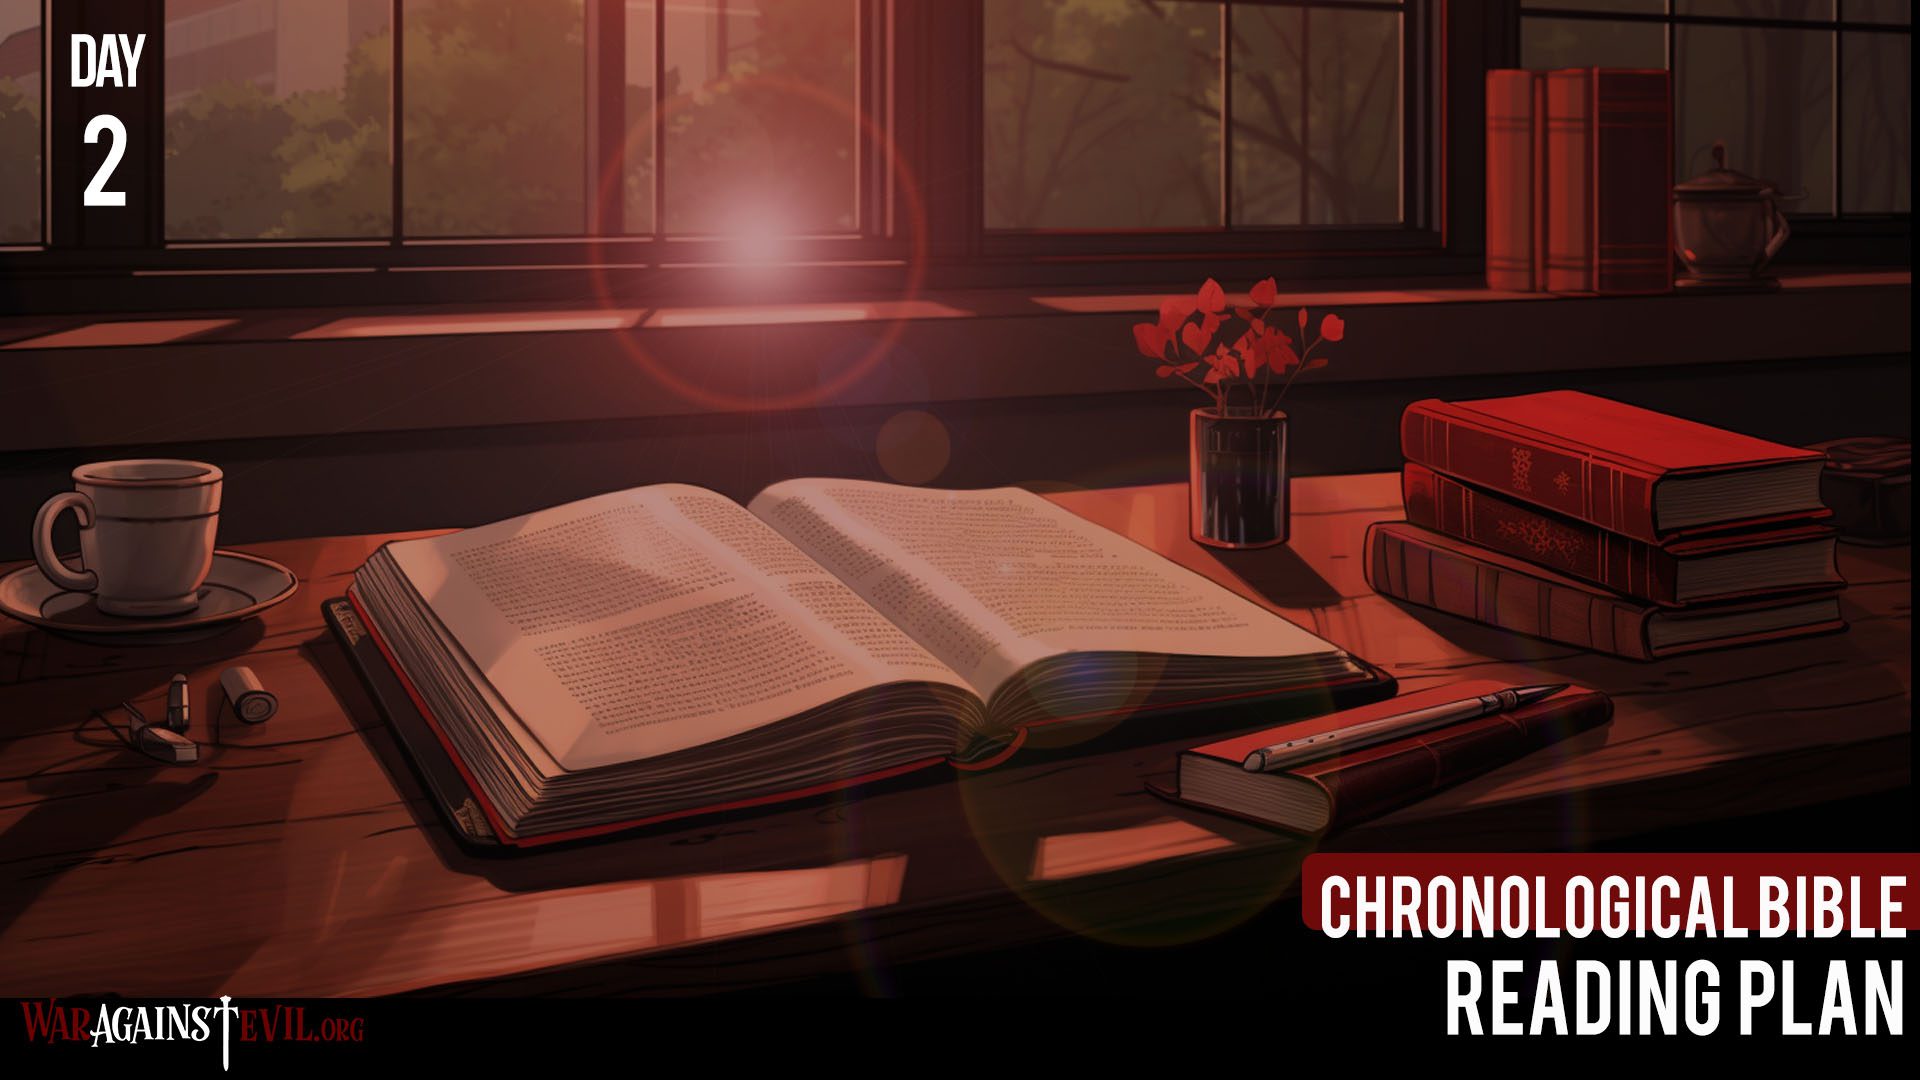 Chronological Bible Reading Plan - Day 2